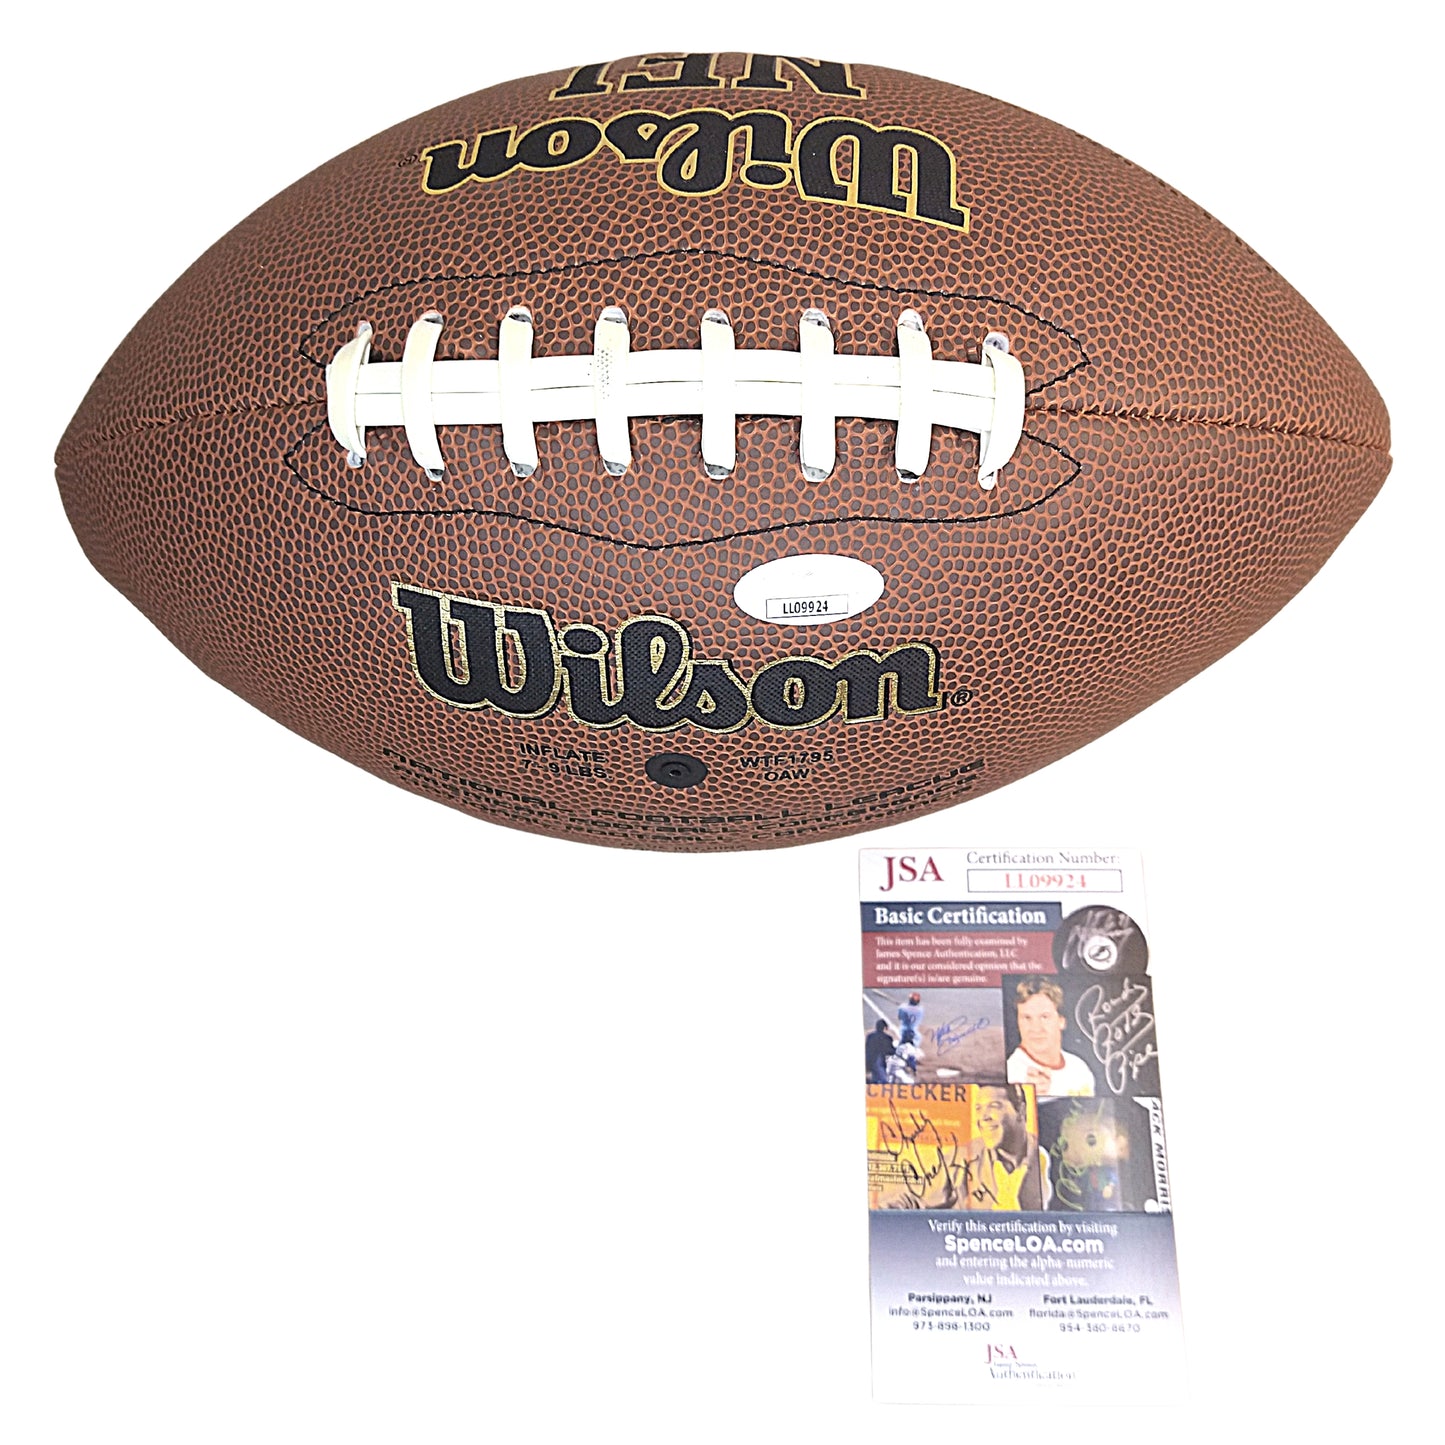 Footballs- Autographed- Melvin Gordon Signed NFL Football - Denver Broncos- Los Angeles Chargers- Wisconsin Badgers- Proof Photo- JSA Authentication - 102